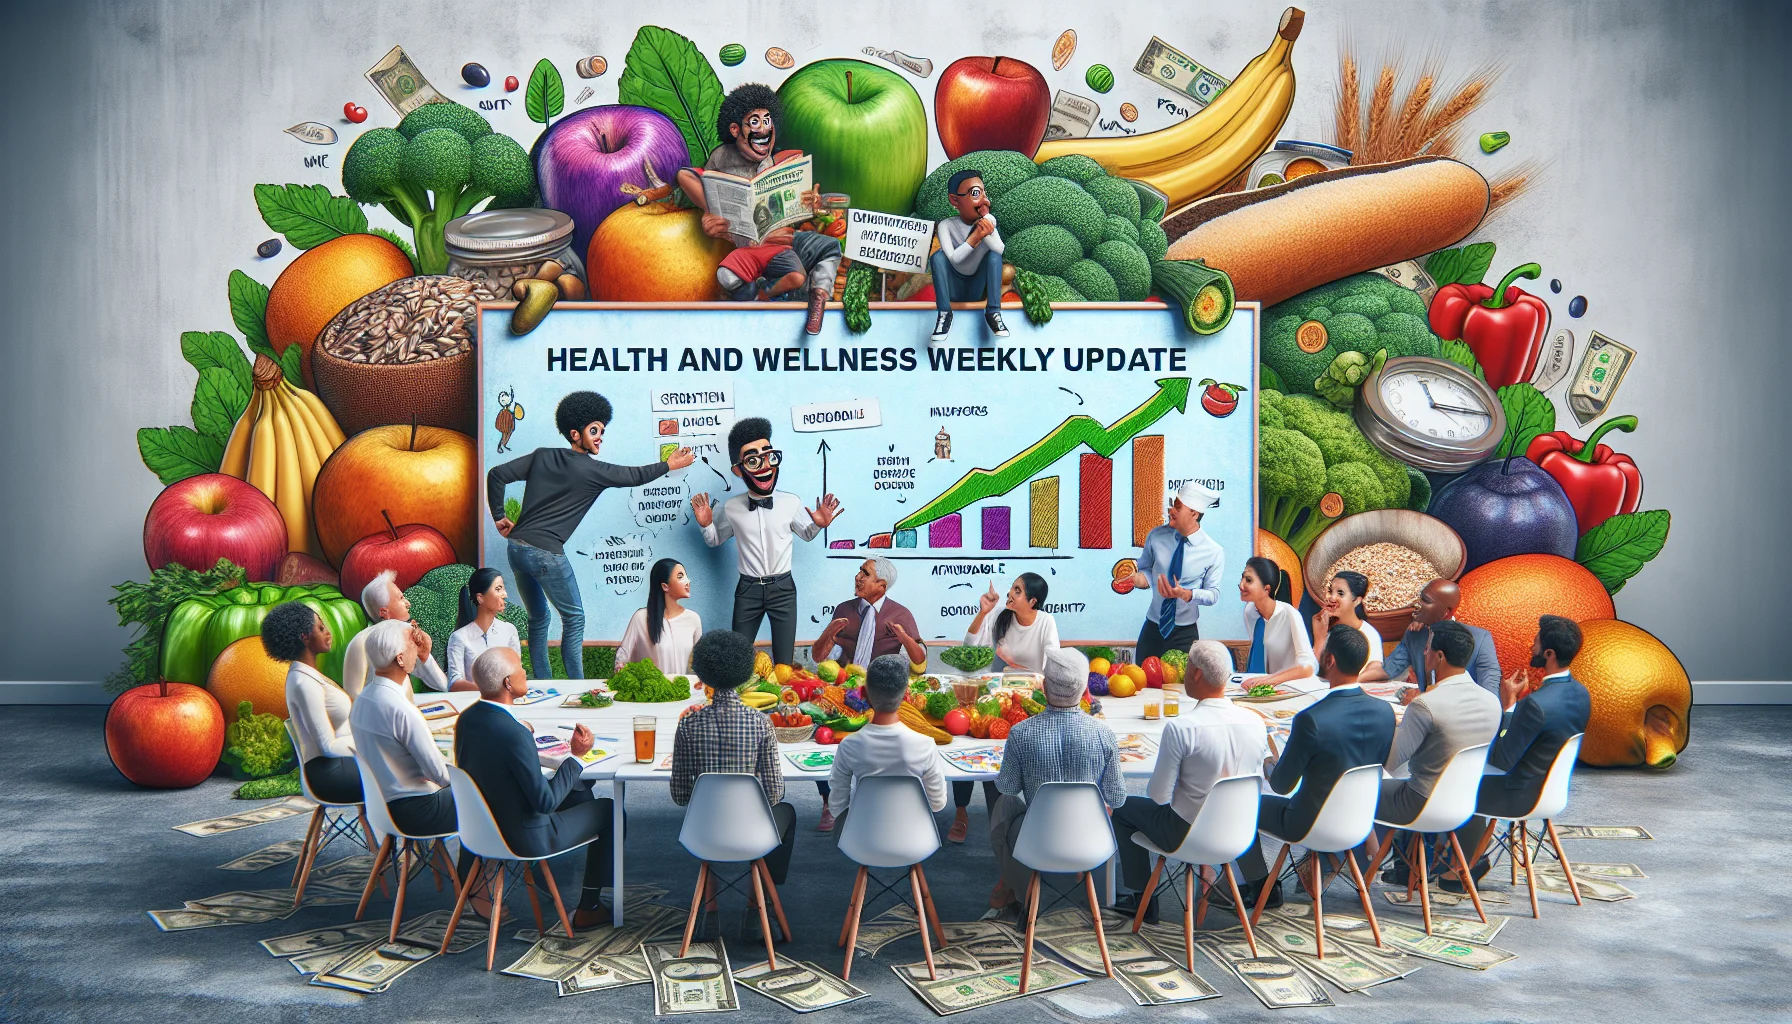 Create a humorous, hyperrealistic image that represents a 'Health and Wellness Weekly Update'. The scene should consist of a casual gathering of diverse individuals, each from a different descent (Black, Caucasian, South Asian, Hispanic, and Middle-Eastern), engaging in a lively discussion on strategies to maintain a healthy diet at a low cost. In the background, display an abundance of colorful fruits, vegetables, and whole grains, symbolizing an affordable, nutritious diet. Add fun elements like a whiteboard with hand-drawn cartoons illustrating the benefits of healthy eating and a pile of dollar bills whimsically replaced by broccoli and apples.